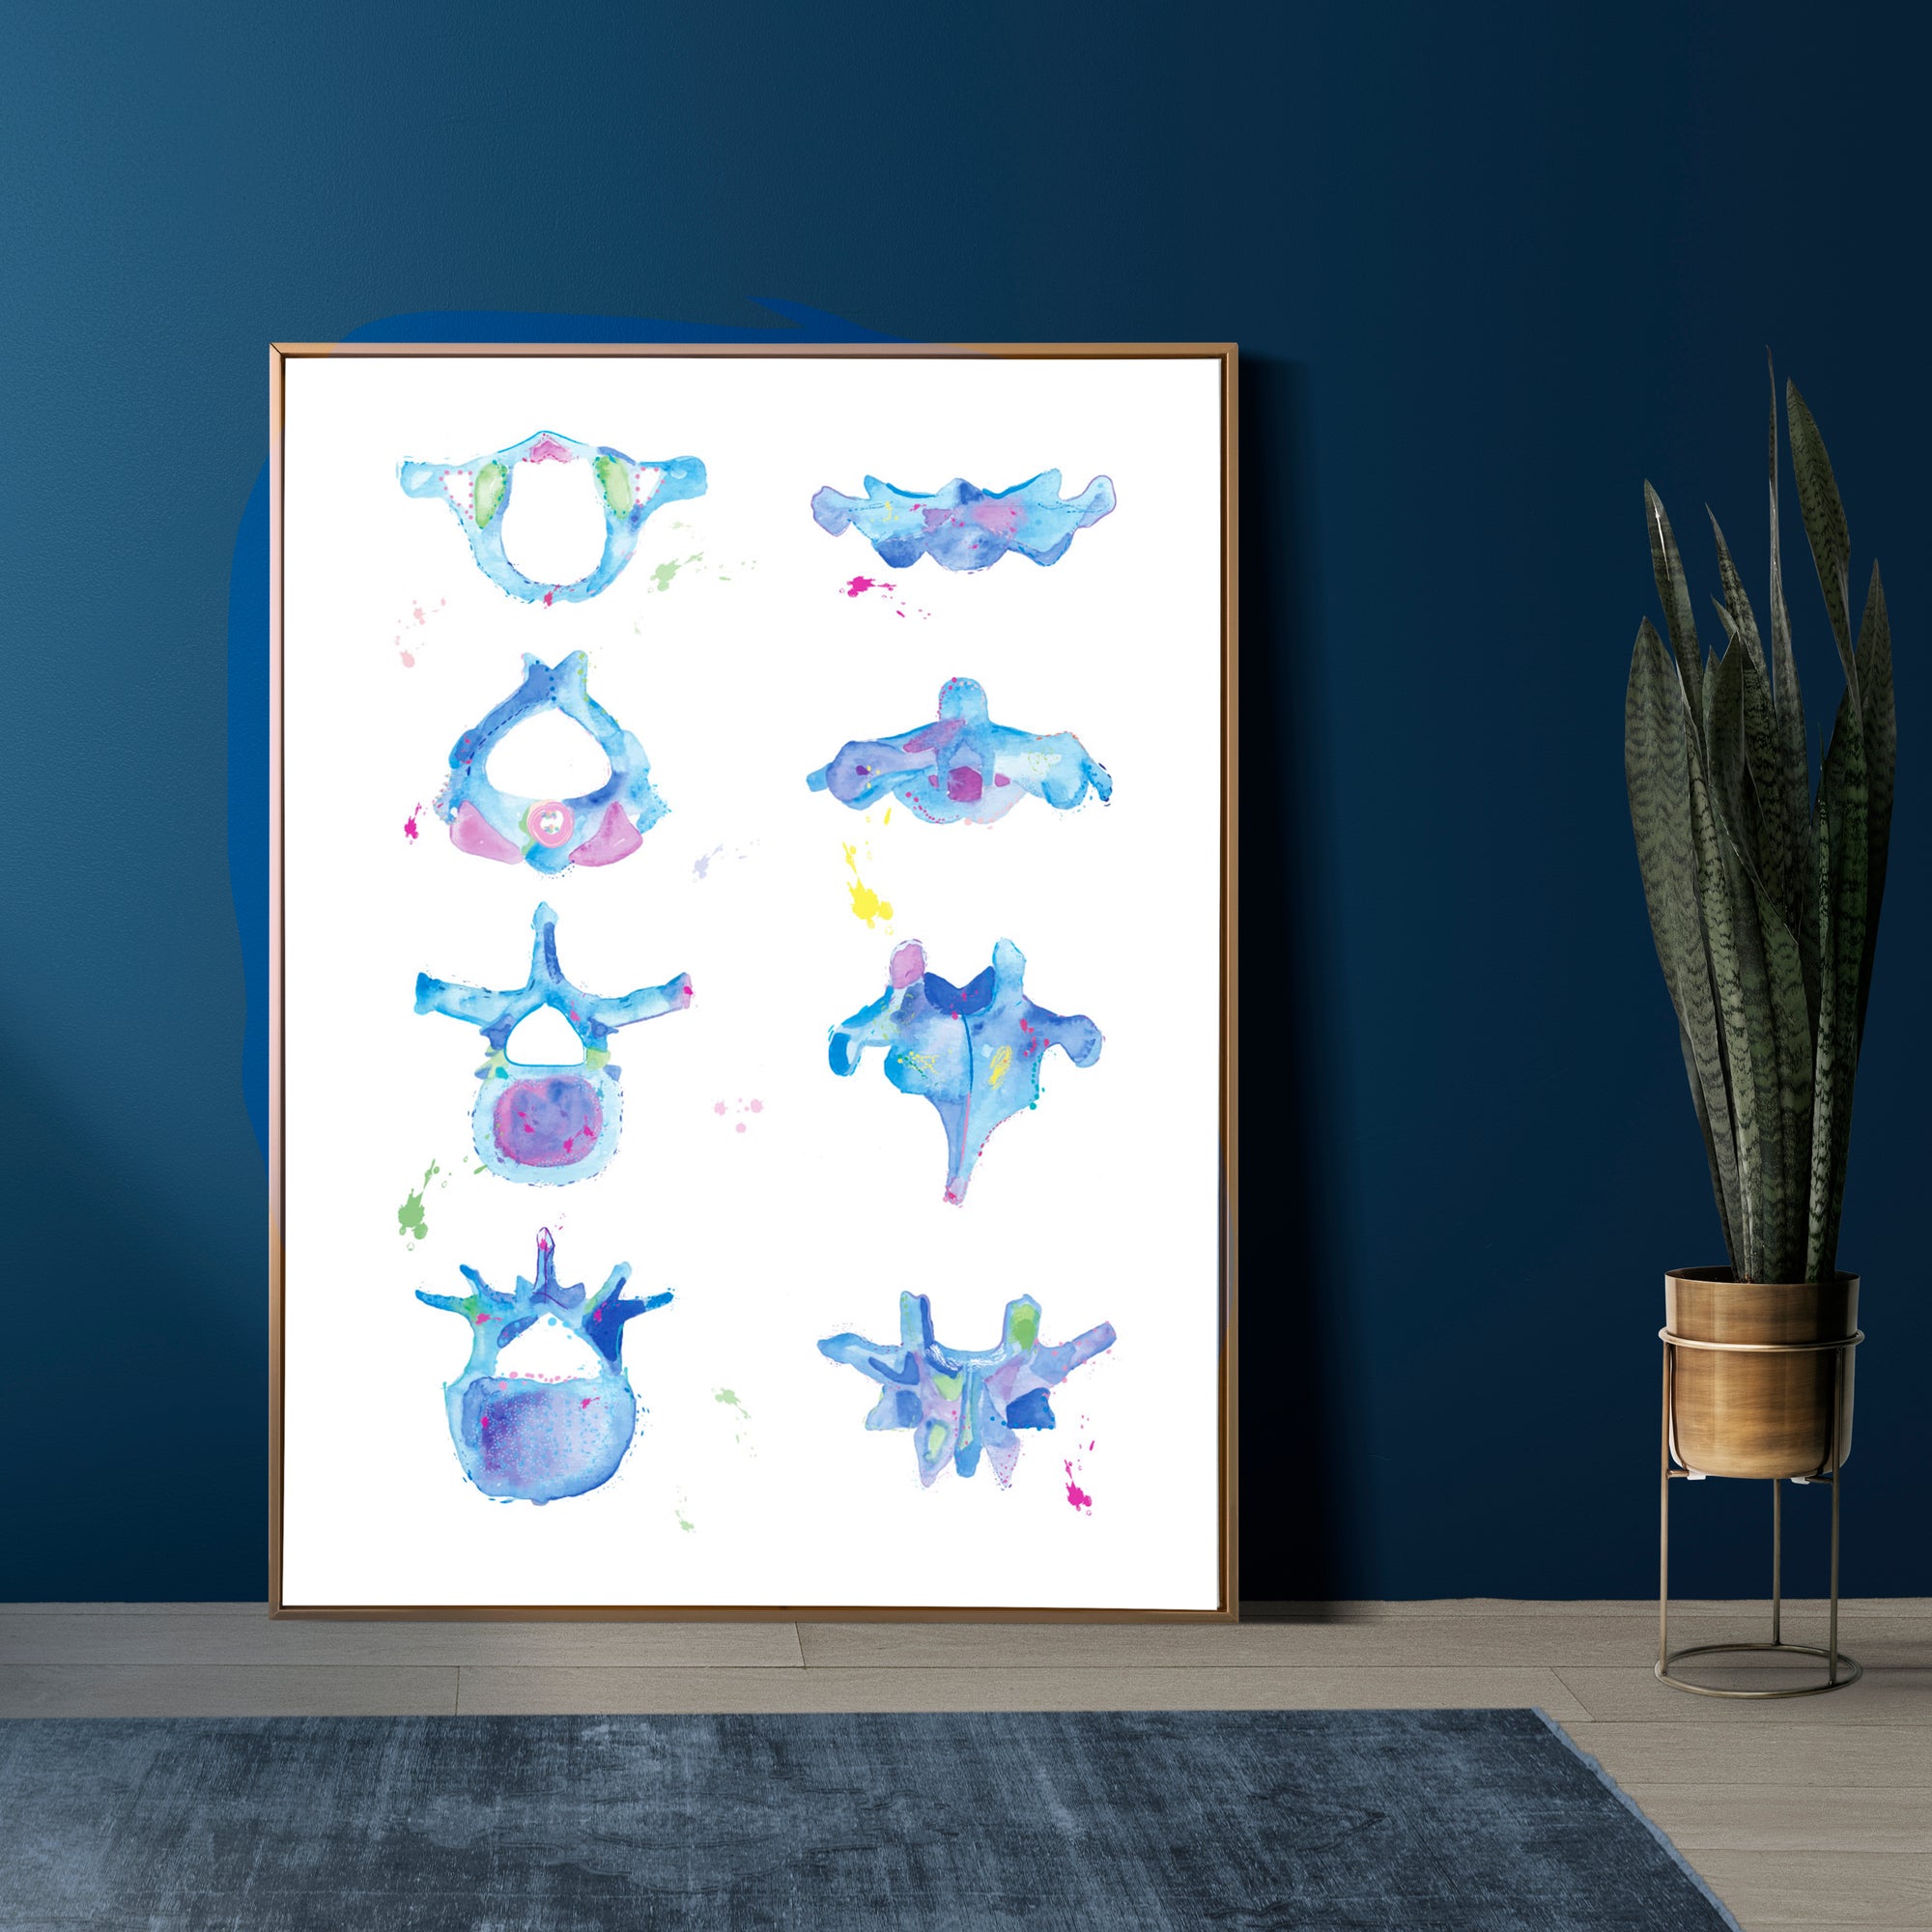 Vertebrae Anatomy Art Print, Chiropractic and Physical Therapy Wall Decor